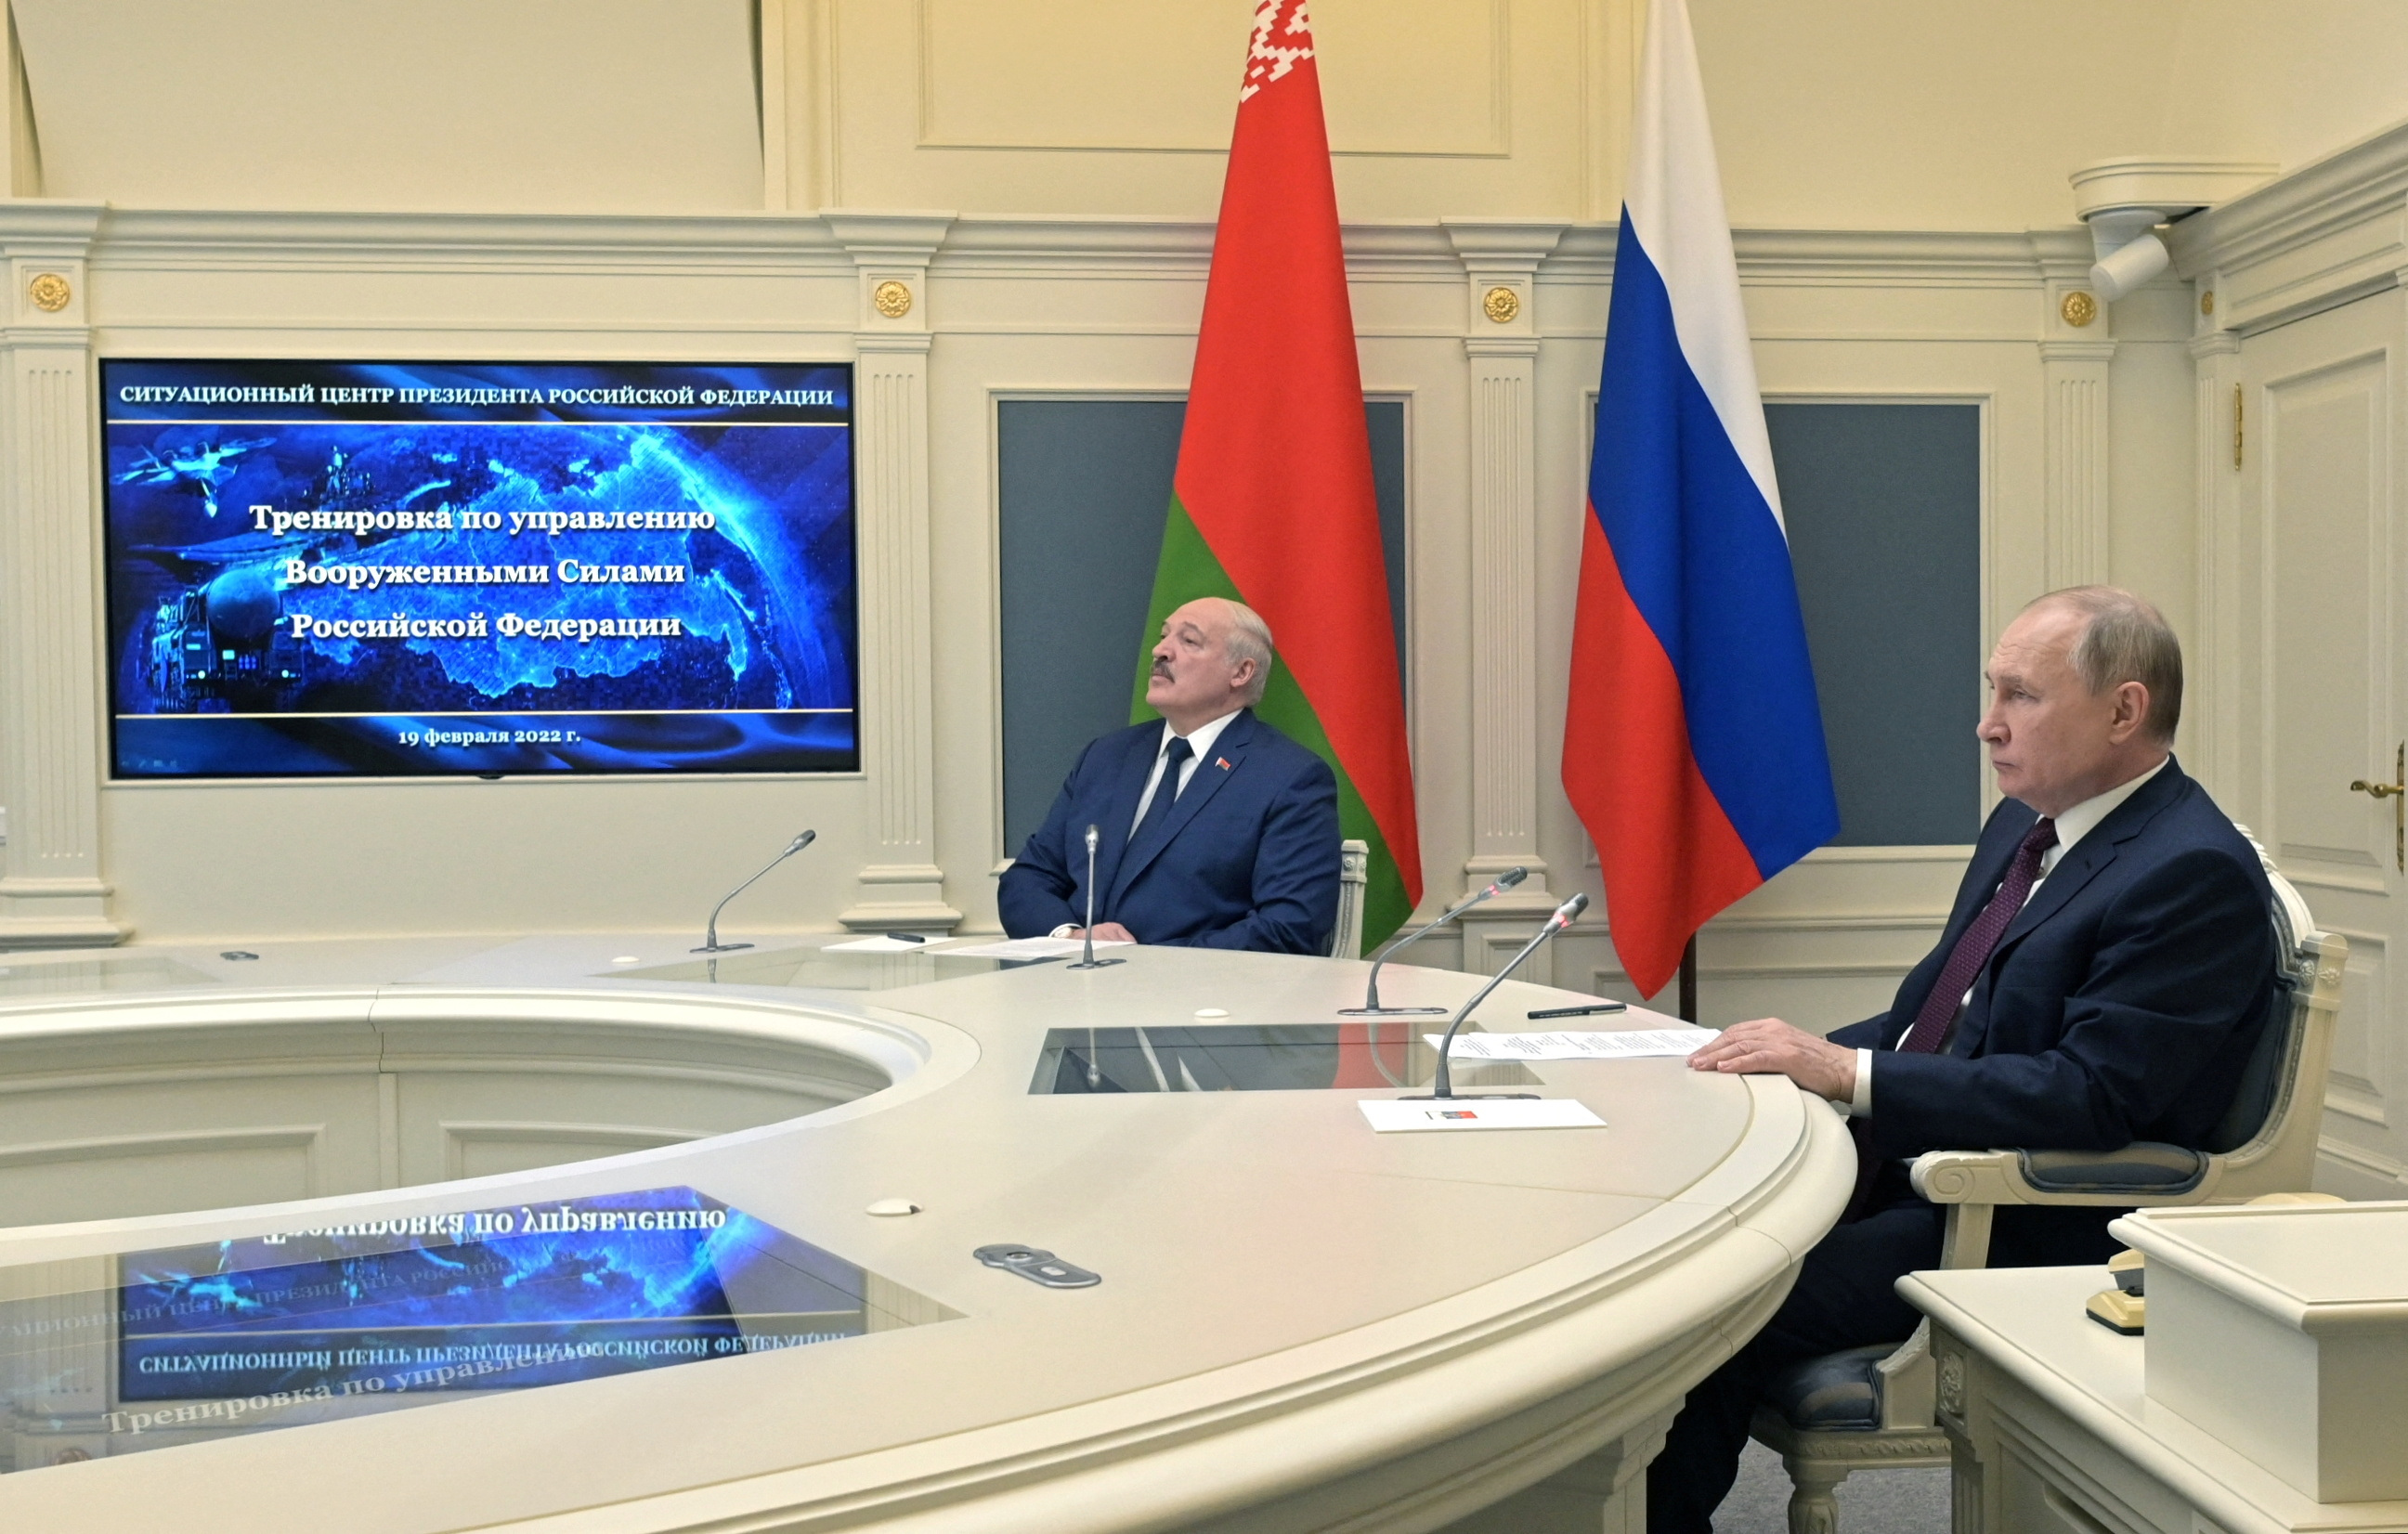 Russian President Vladimir Putin and Belarusian President Alexander Lukashenko observe the exercise of the strategic deterrence force, in Moscow